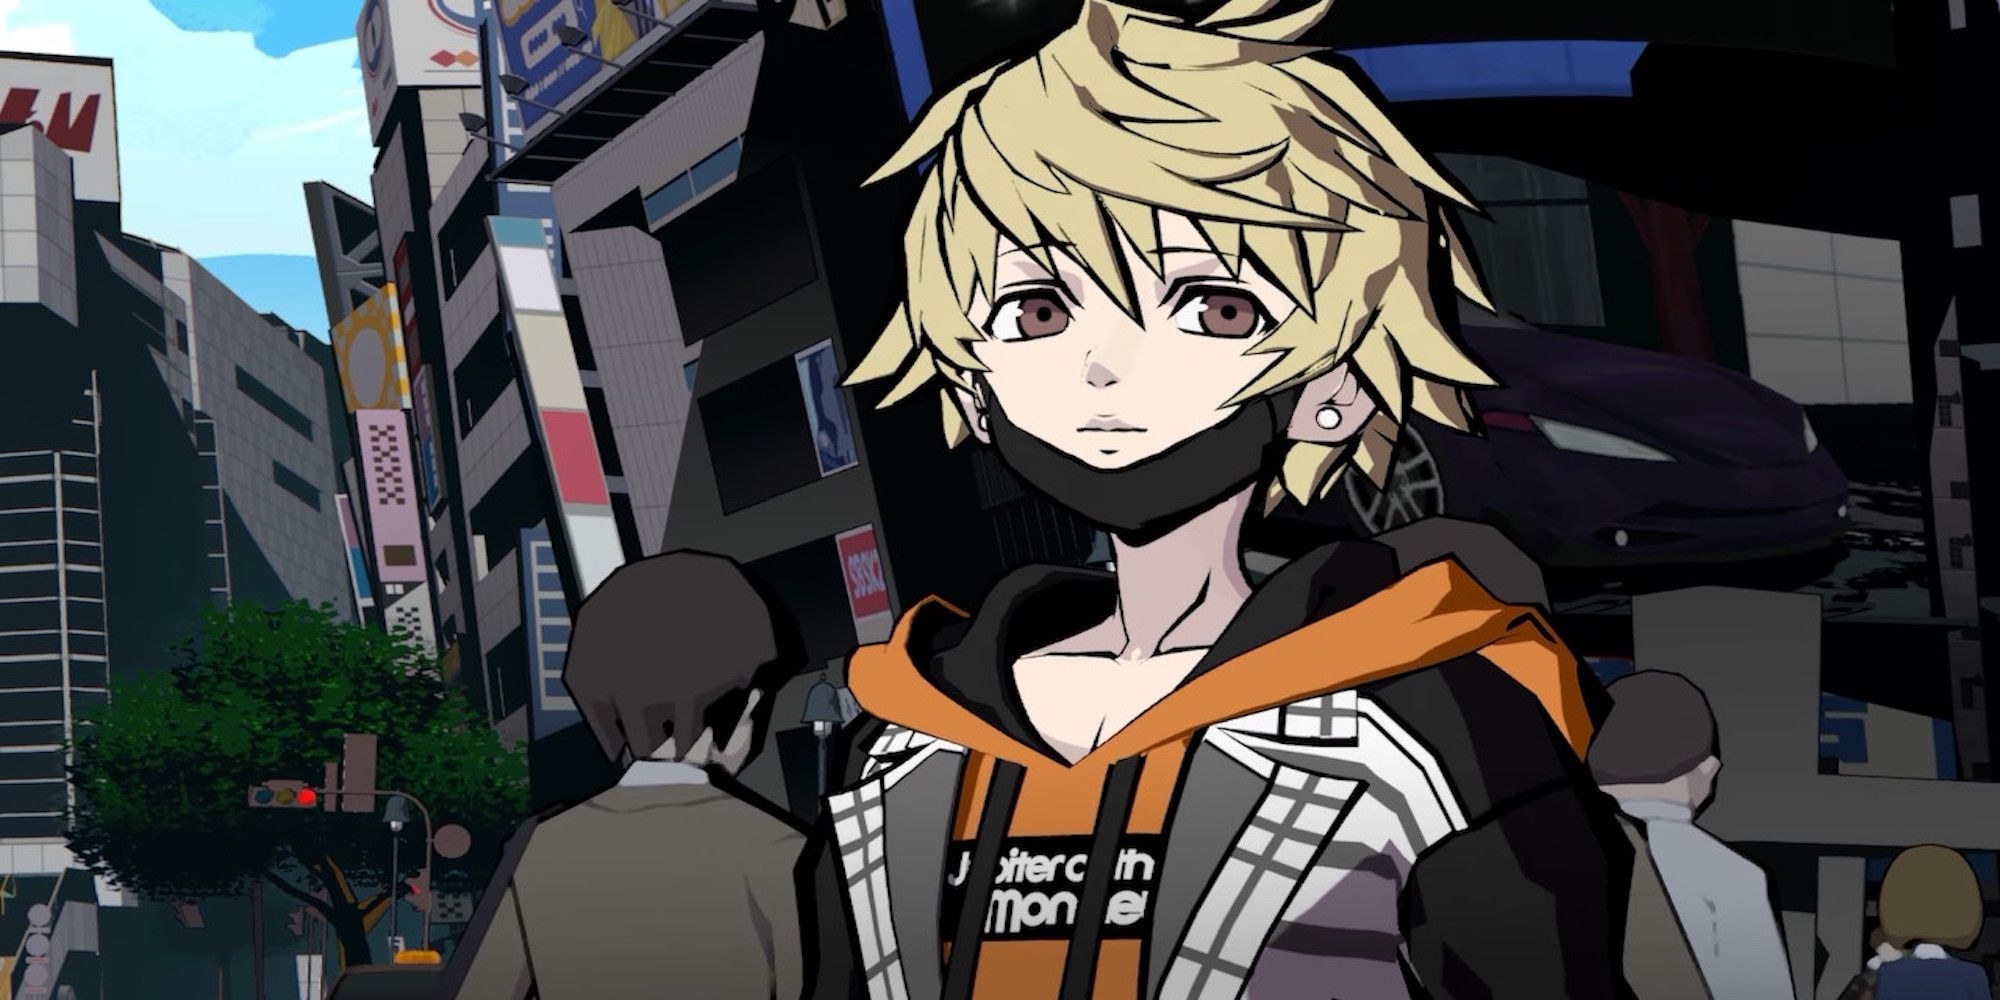 Rindo from Neo: The World Ends With You